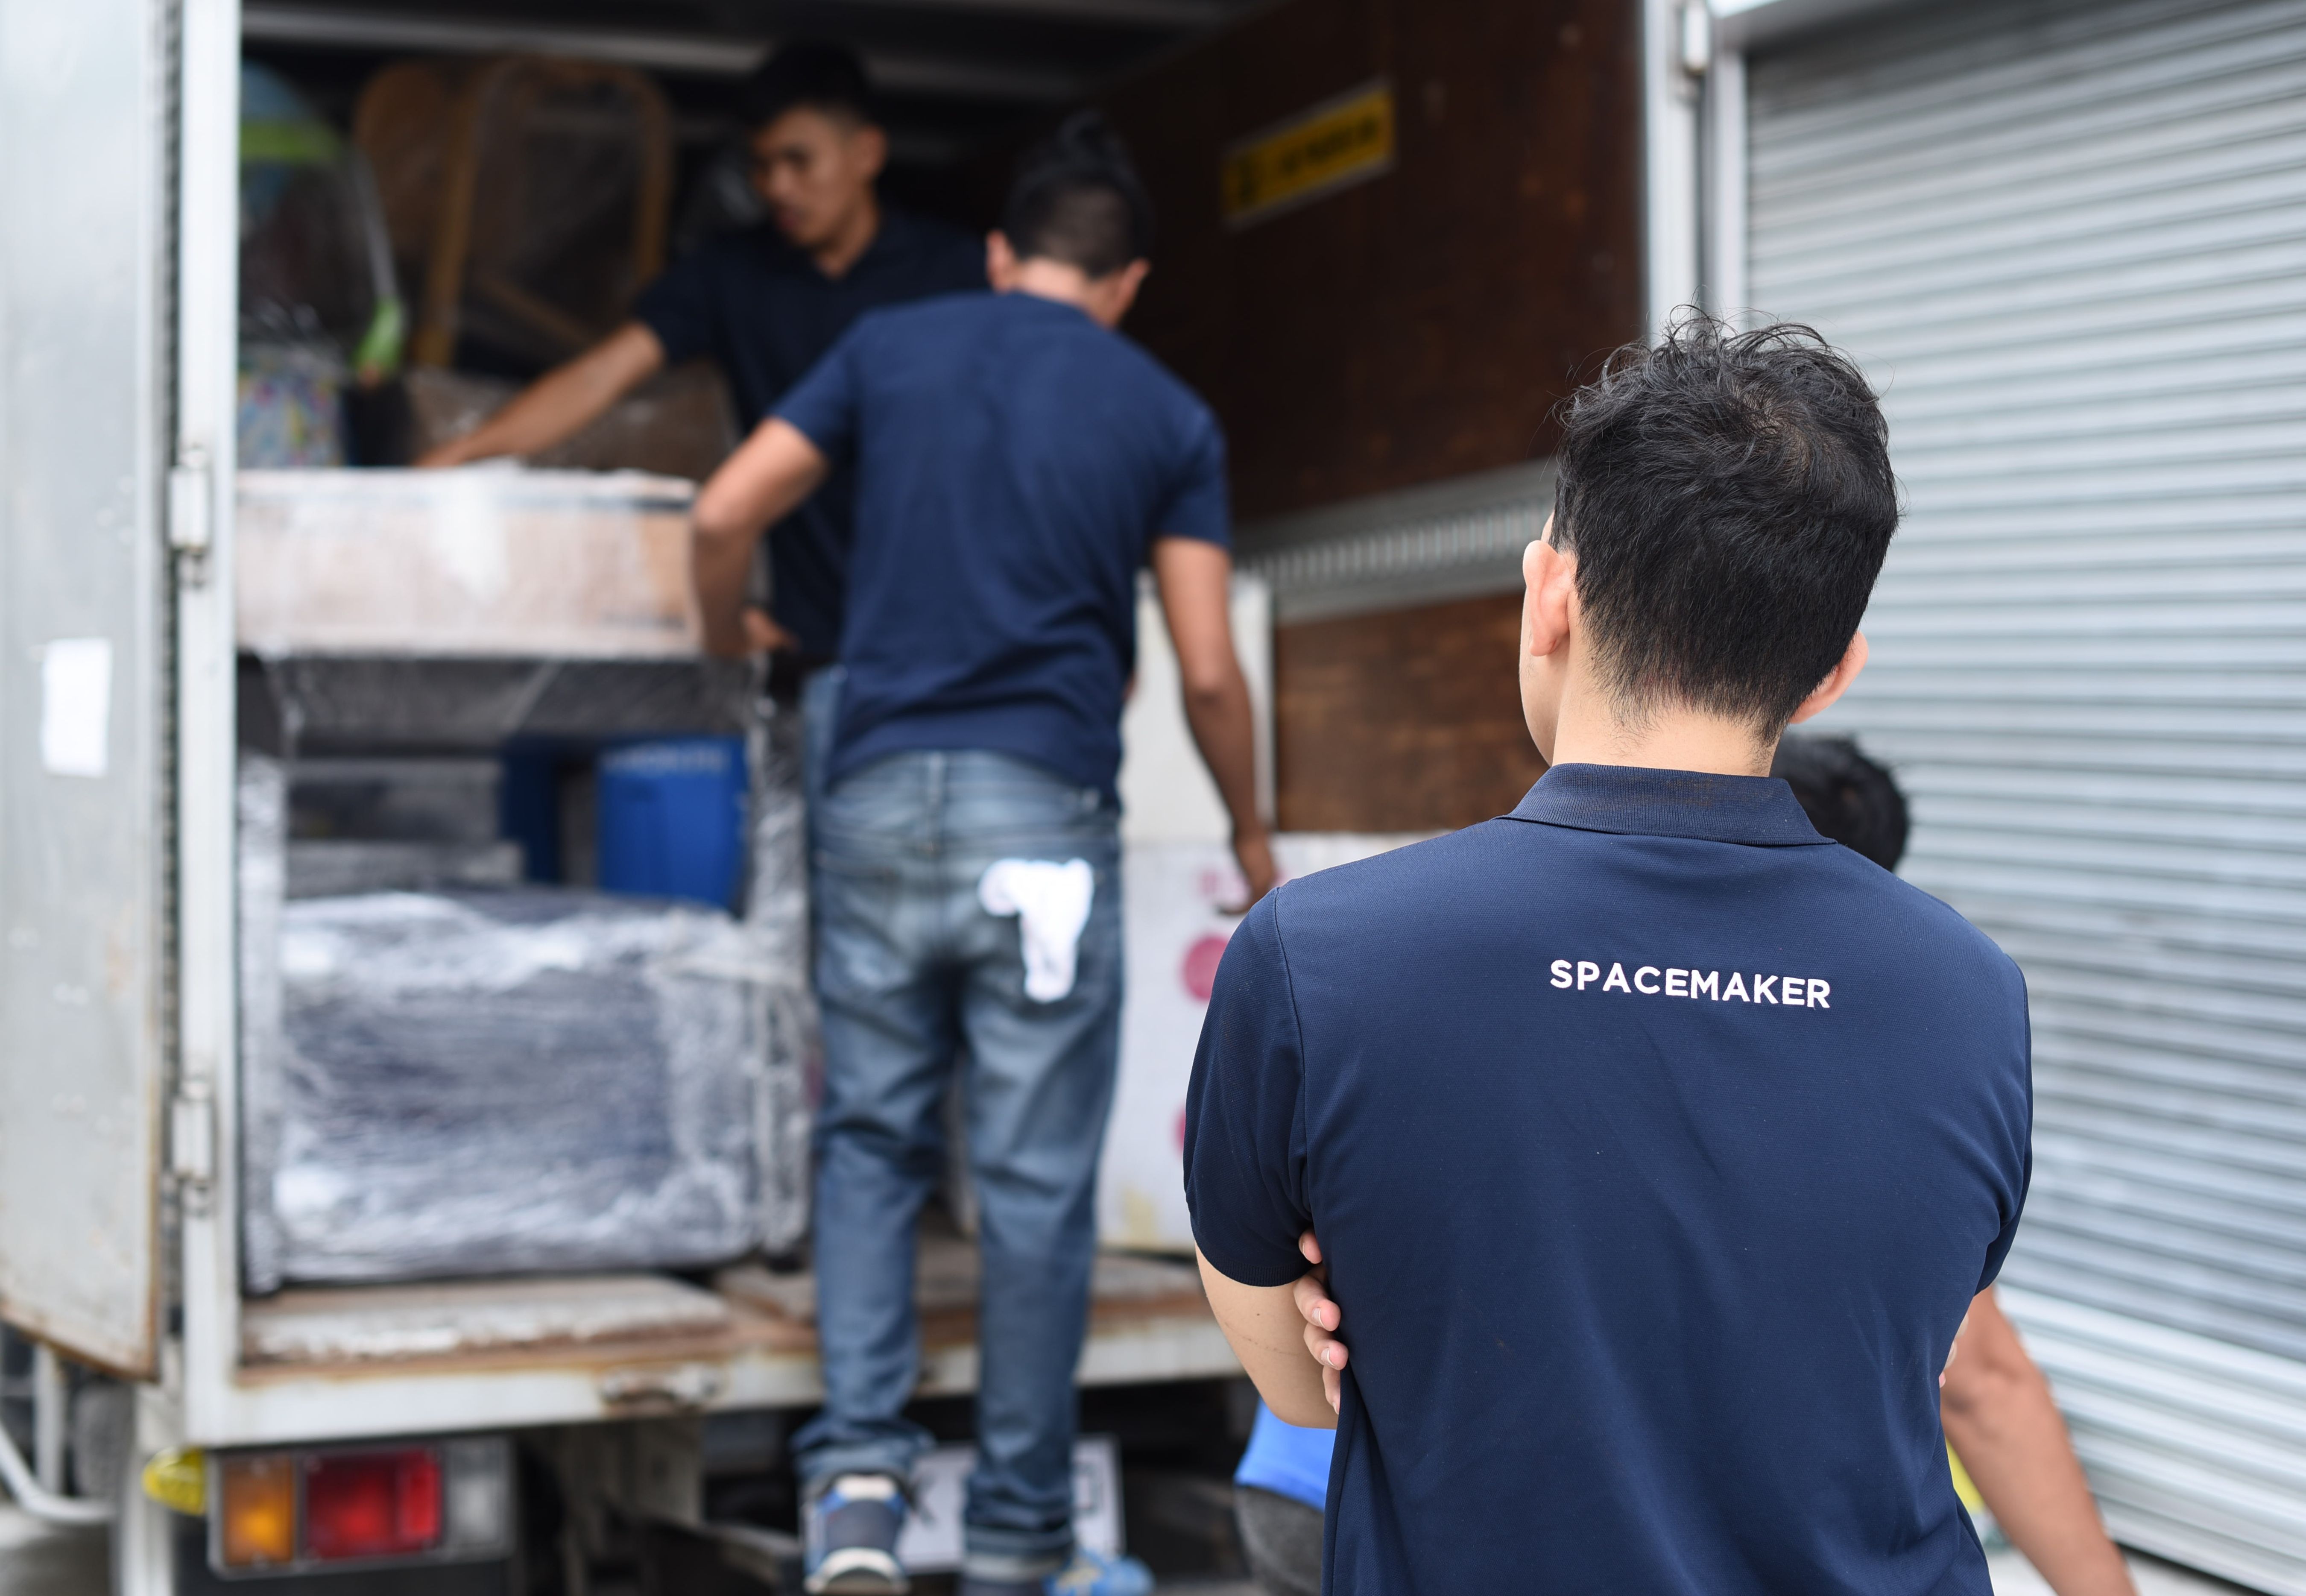 Spacemaker loading items at the back of a truck